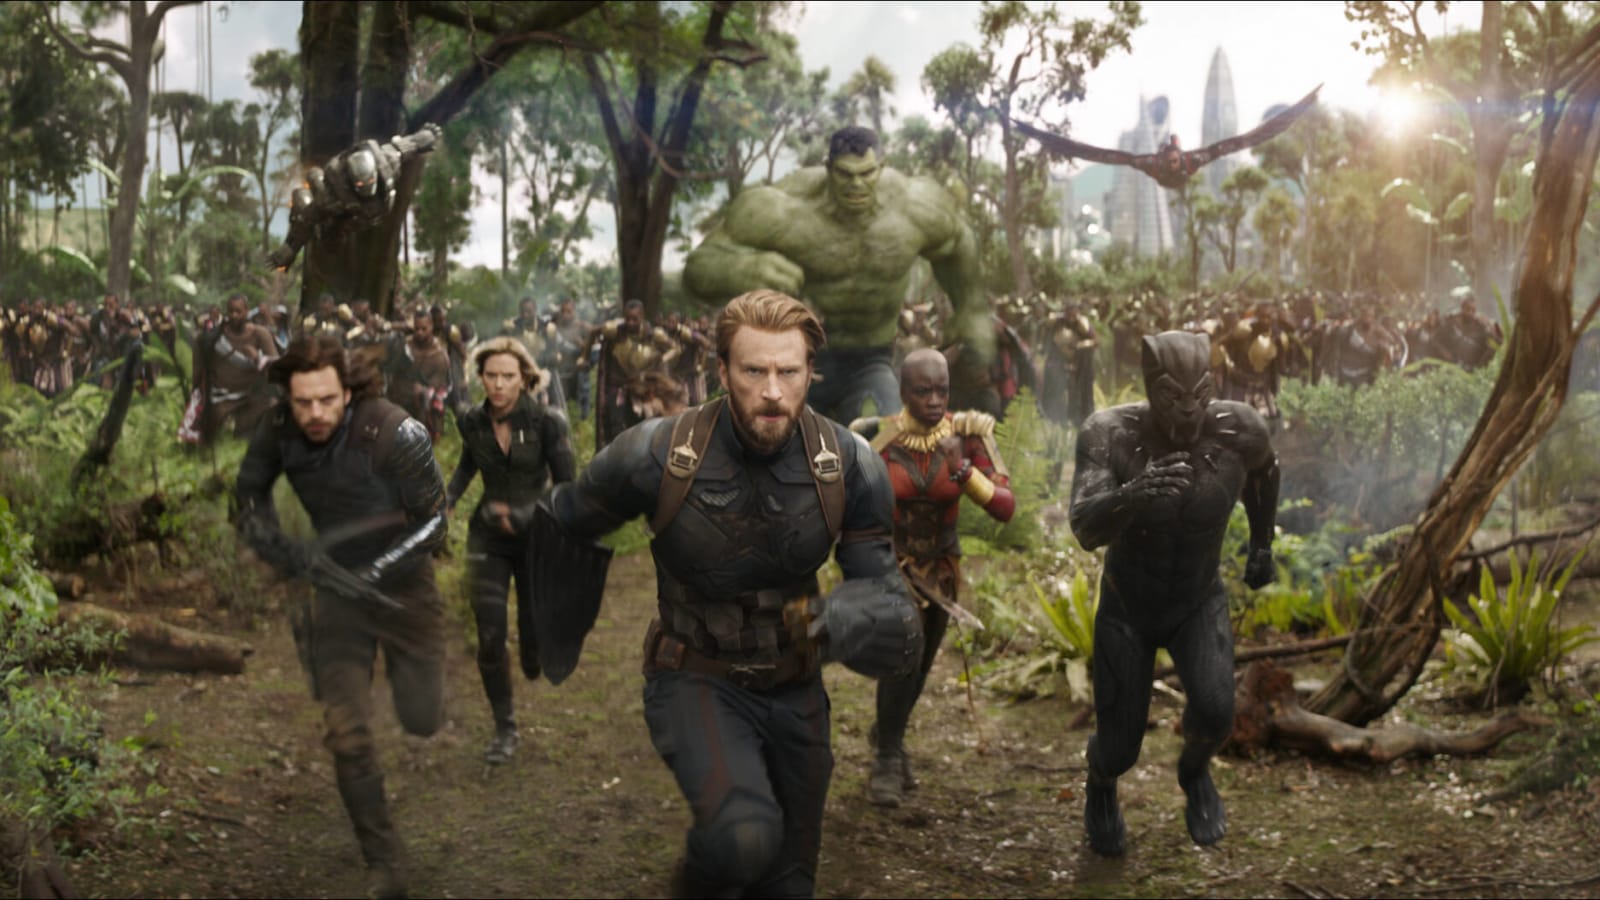 20 facts you might not know about 'Avengers: Infinity War'